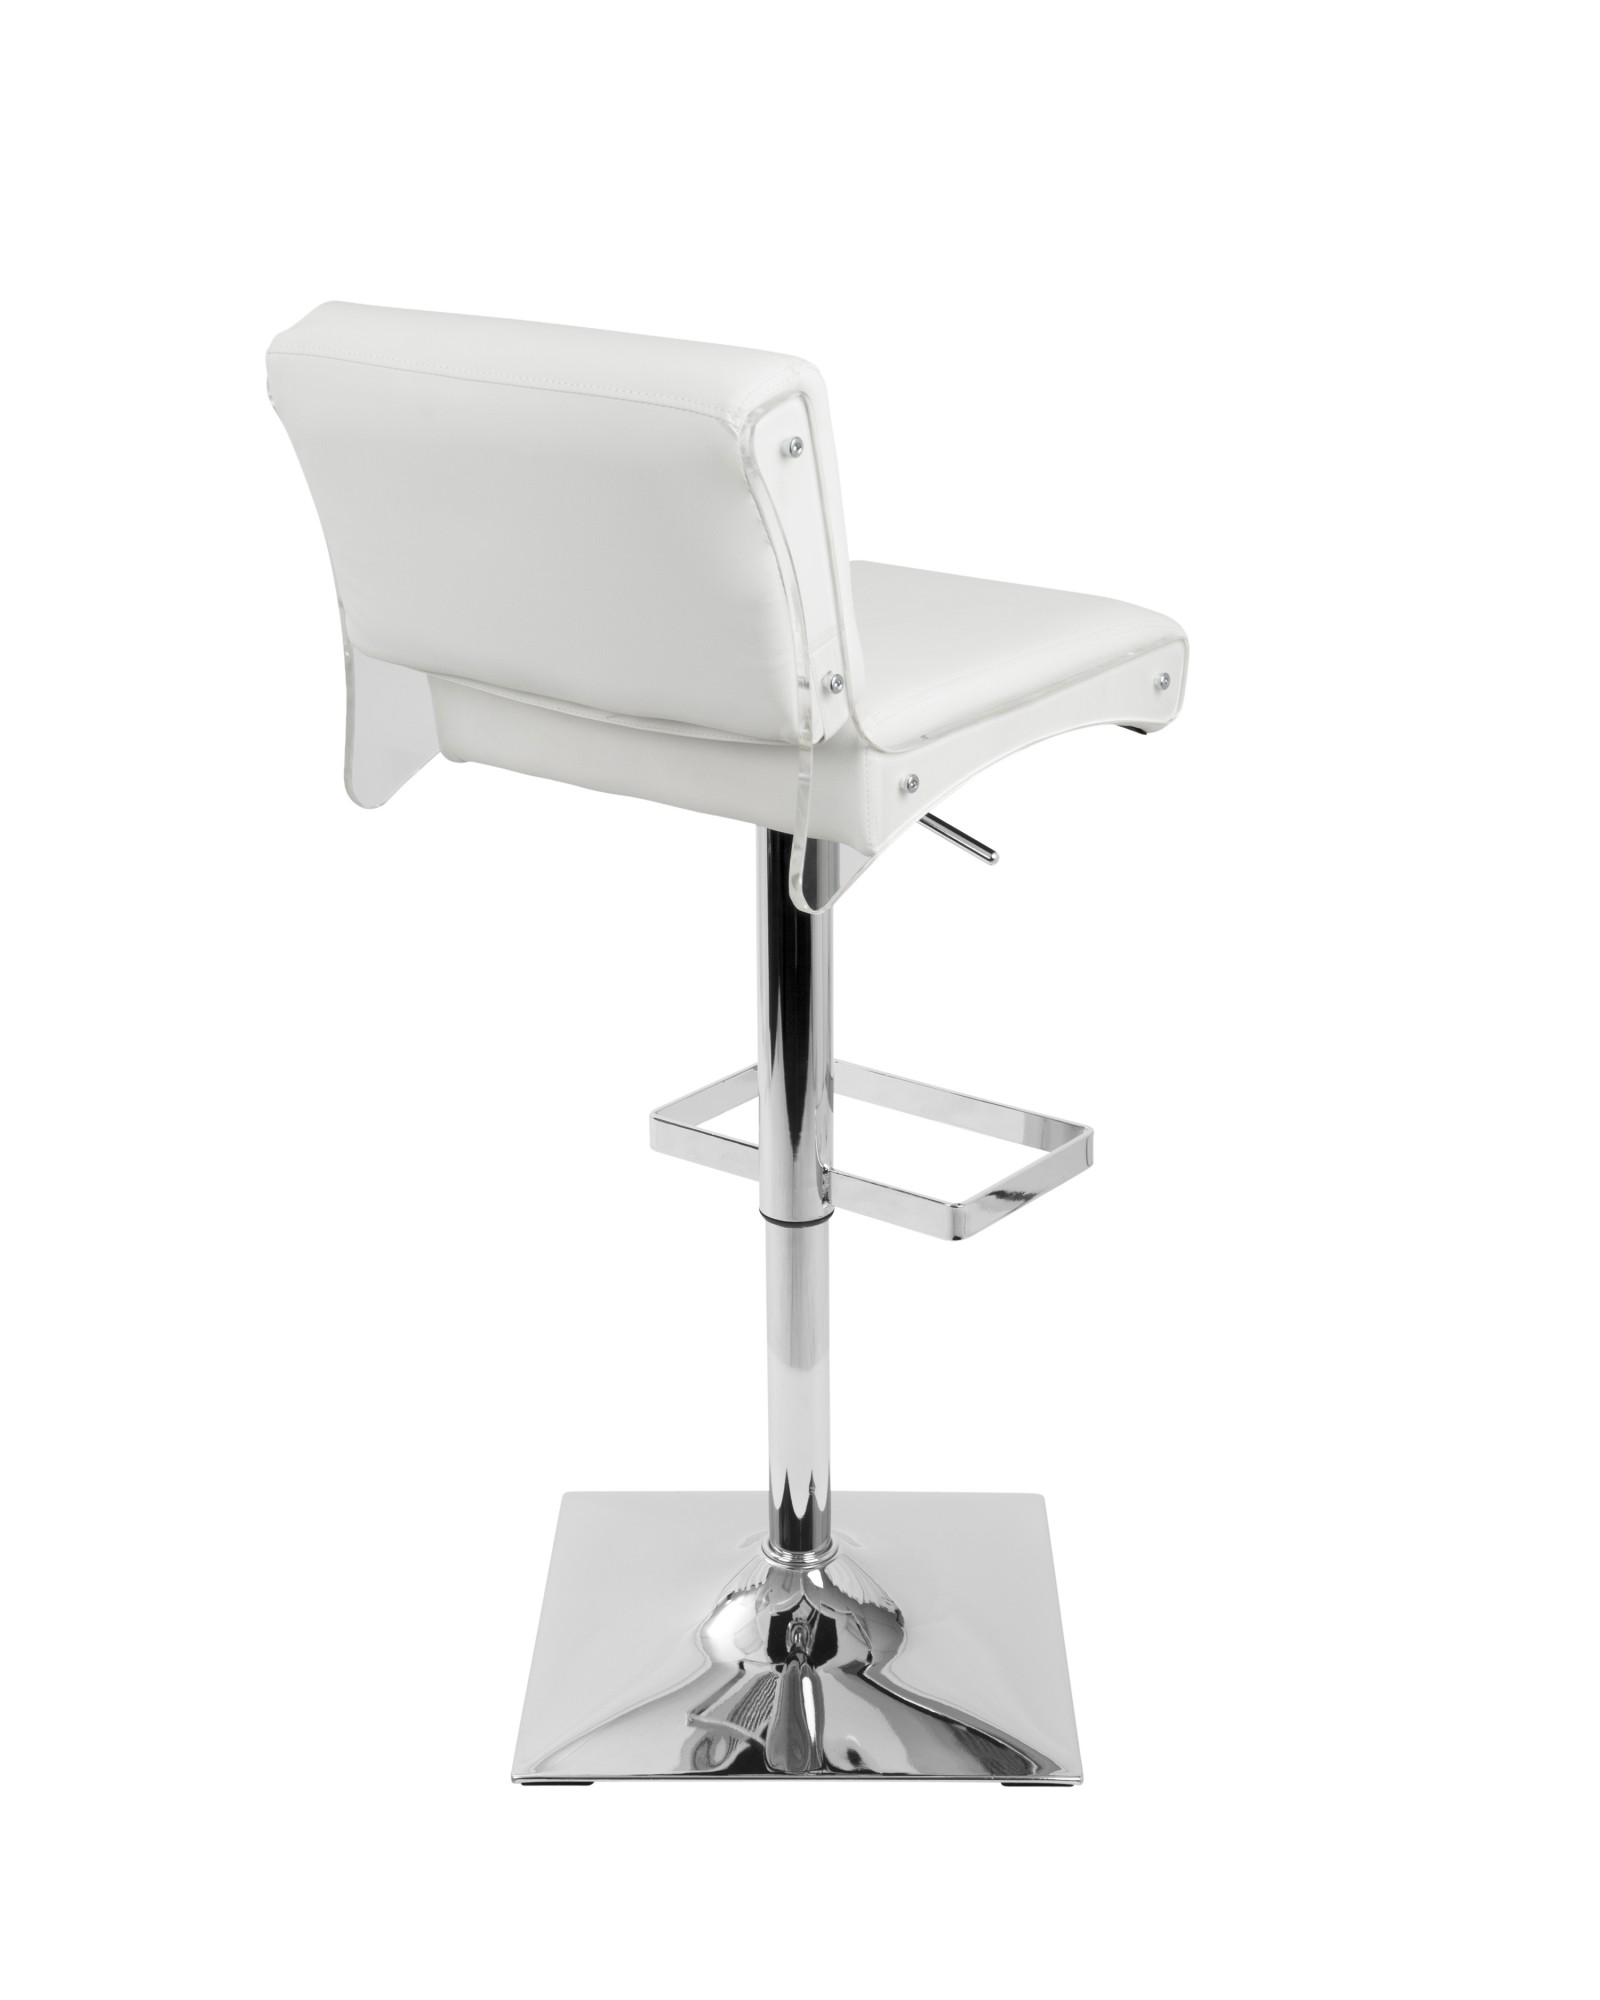 Éclair Contemporary Adjustable Barstool in White Faux Leather